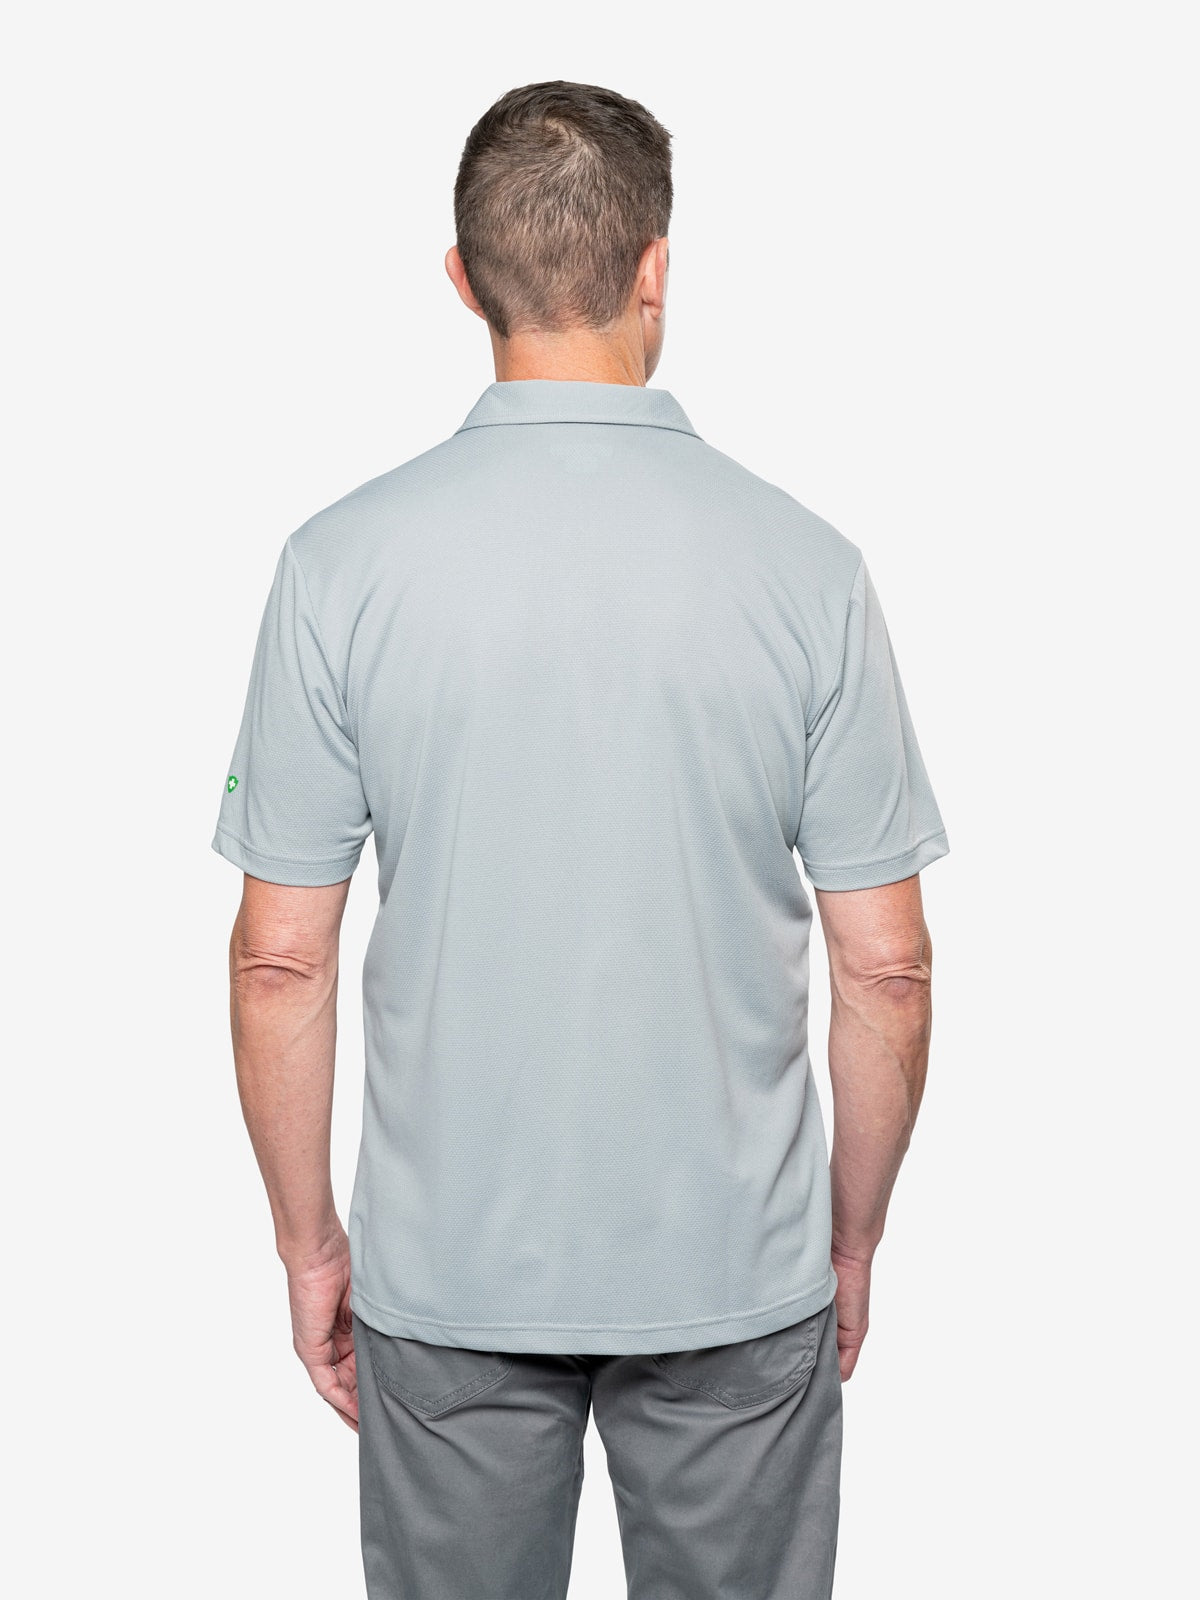 Insect Shield Men's Airflow Short Sleeve Polo Shirt